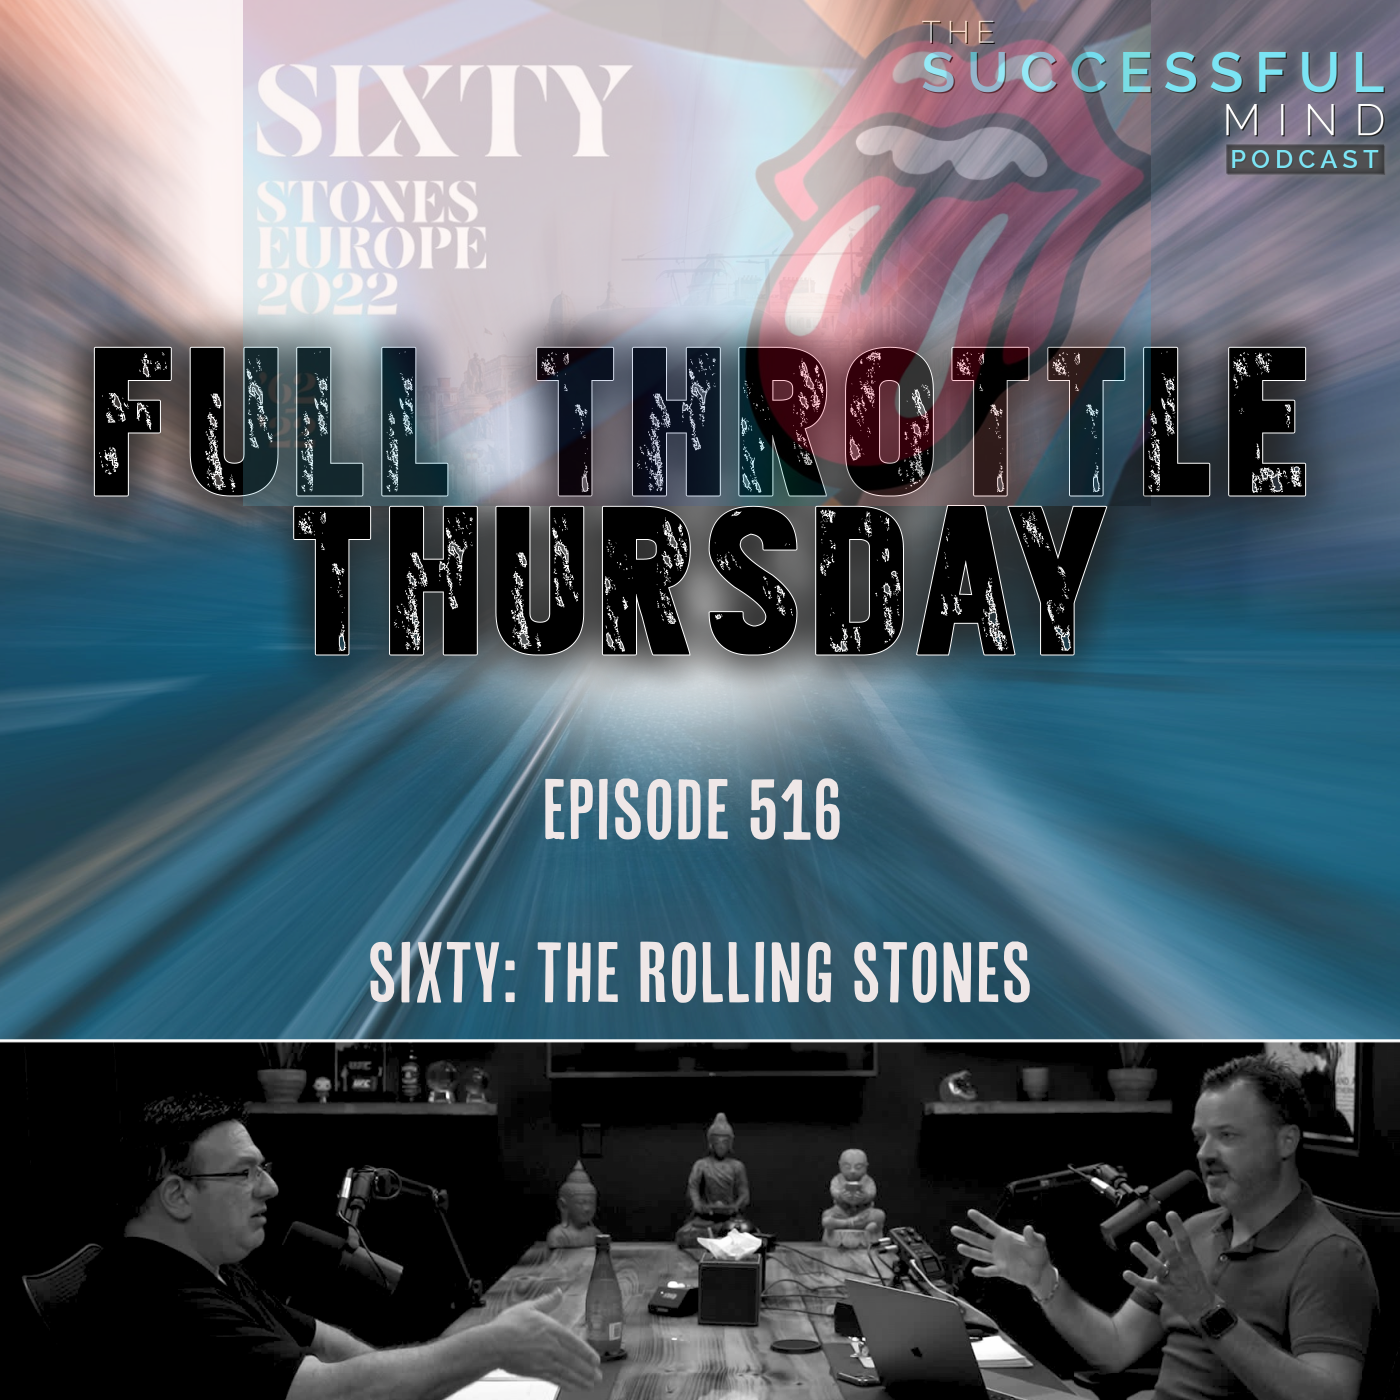 The Successful Mind Podcast - Full Throttle Thursday - Sixty - The Rolling Stones